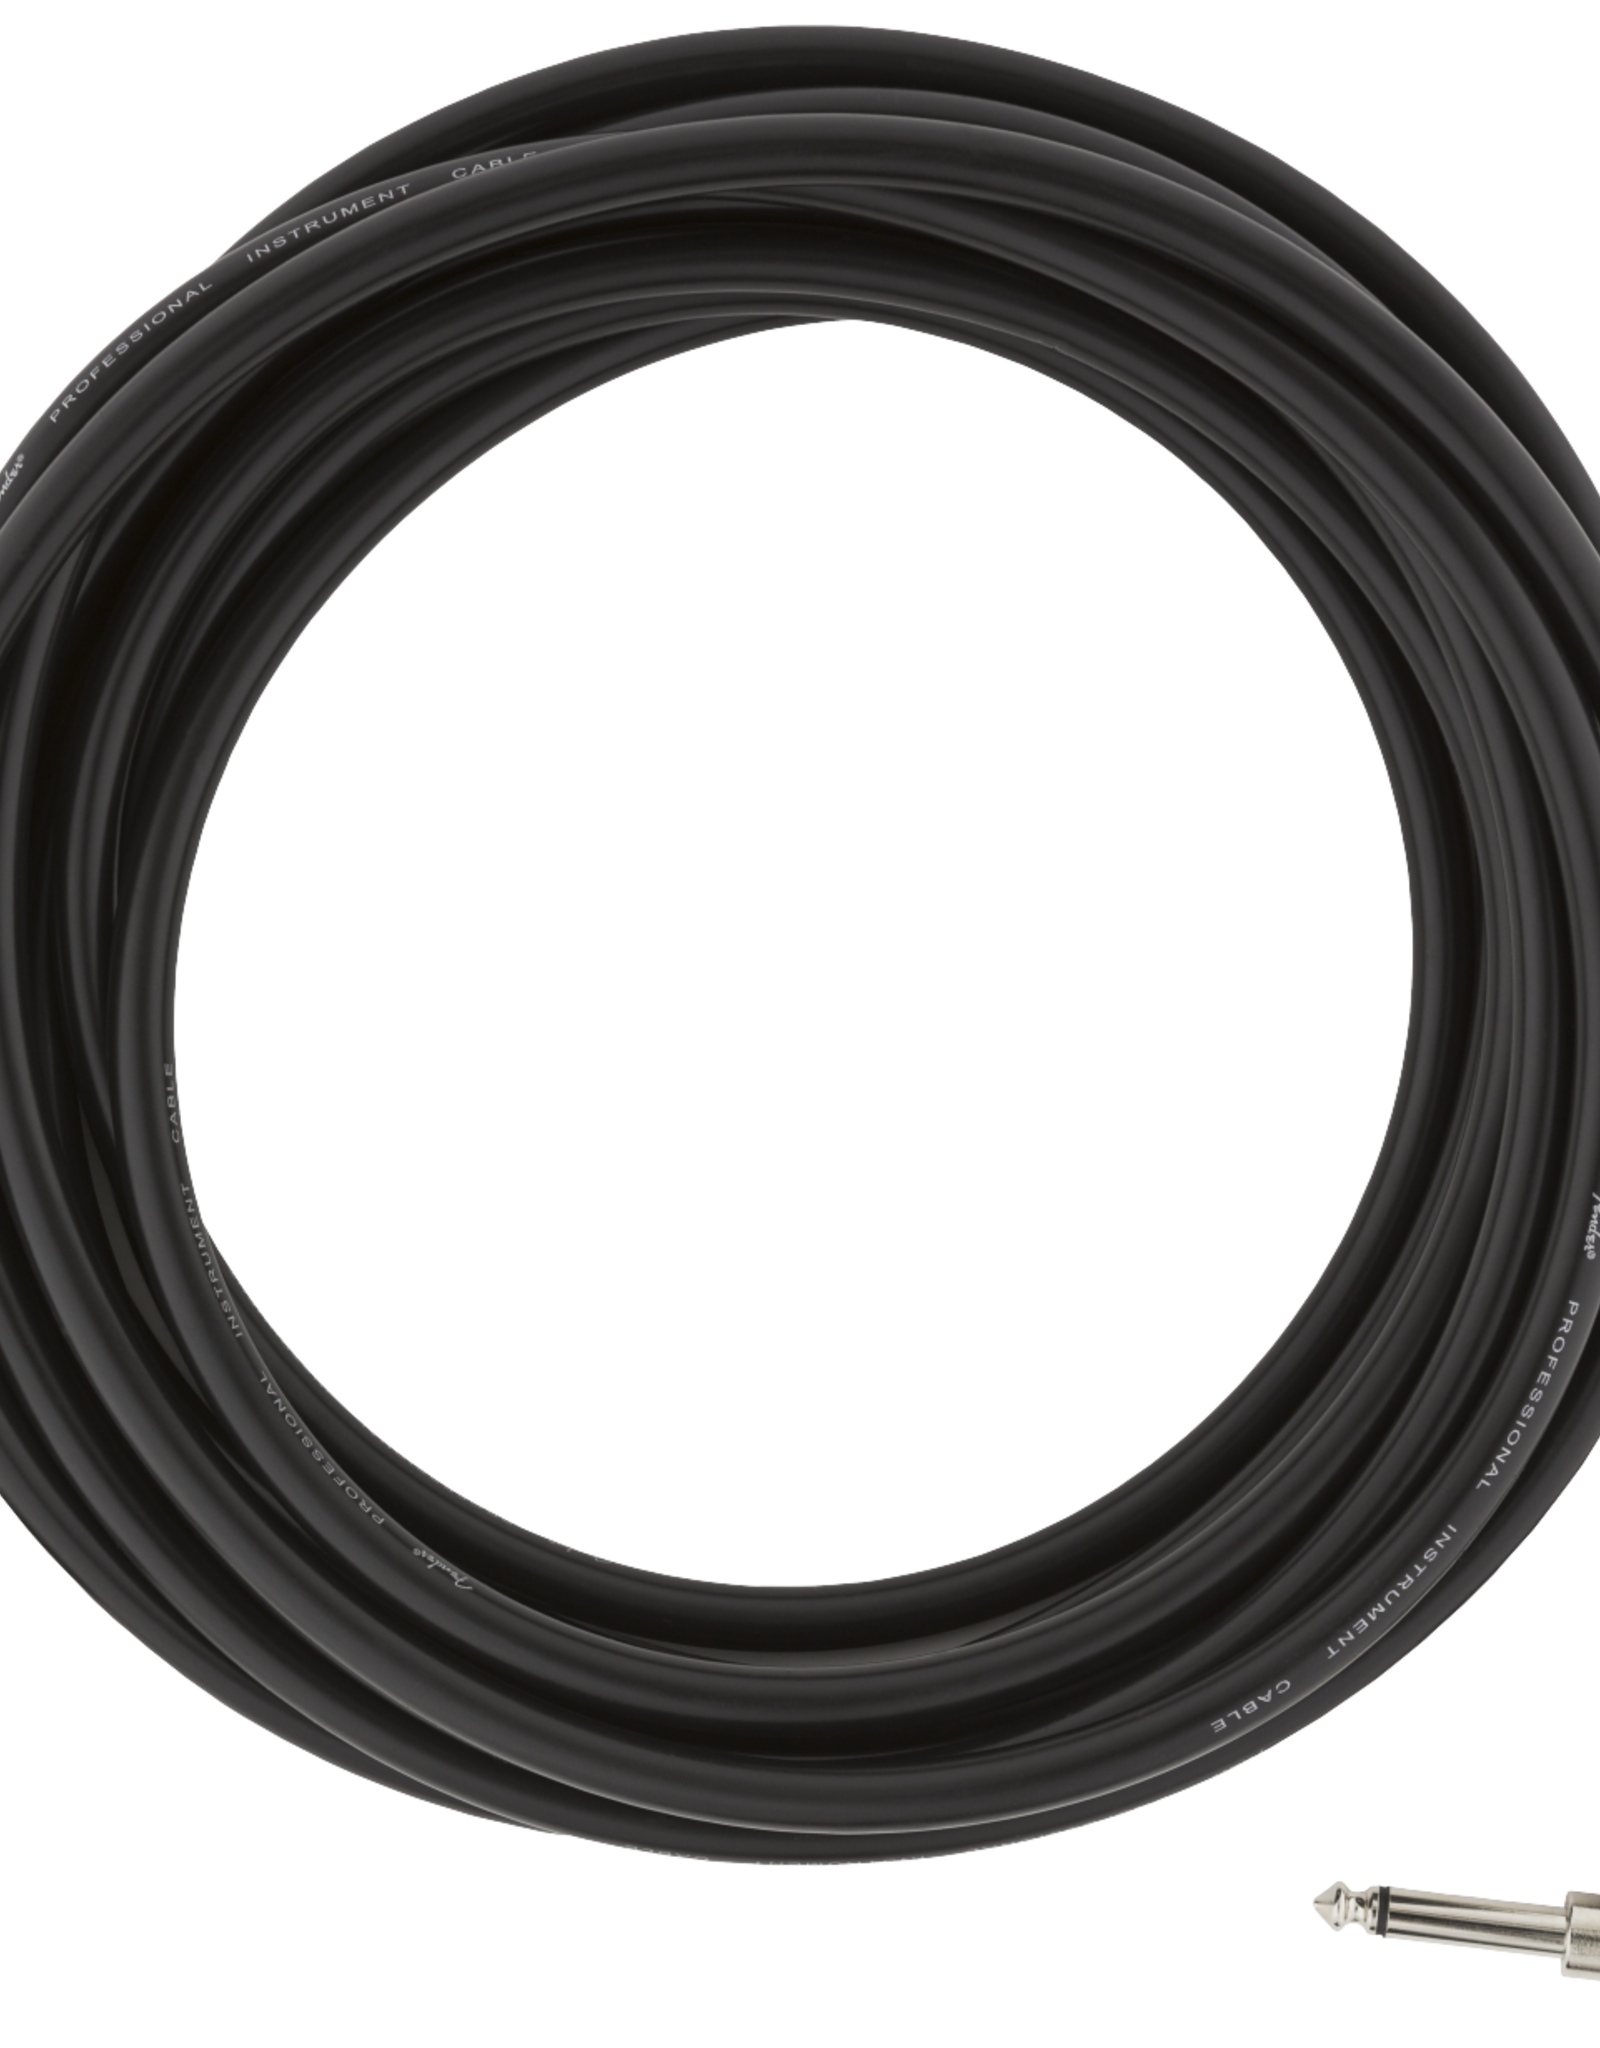 Fender Fender Professional Series Instrument Cable, Straight/Angle, 18.6' Black